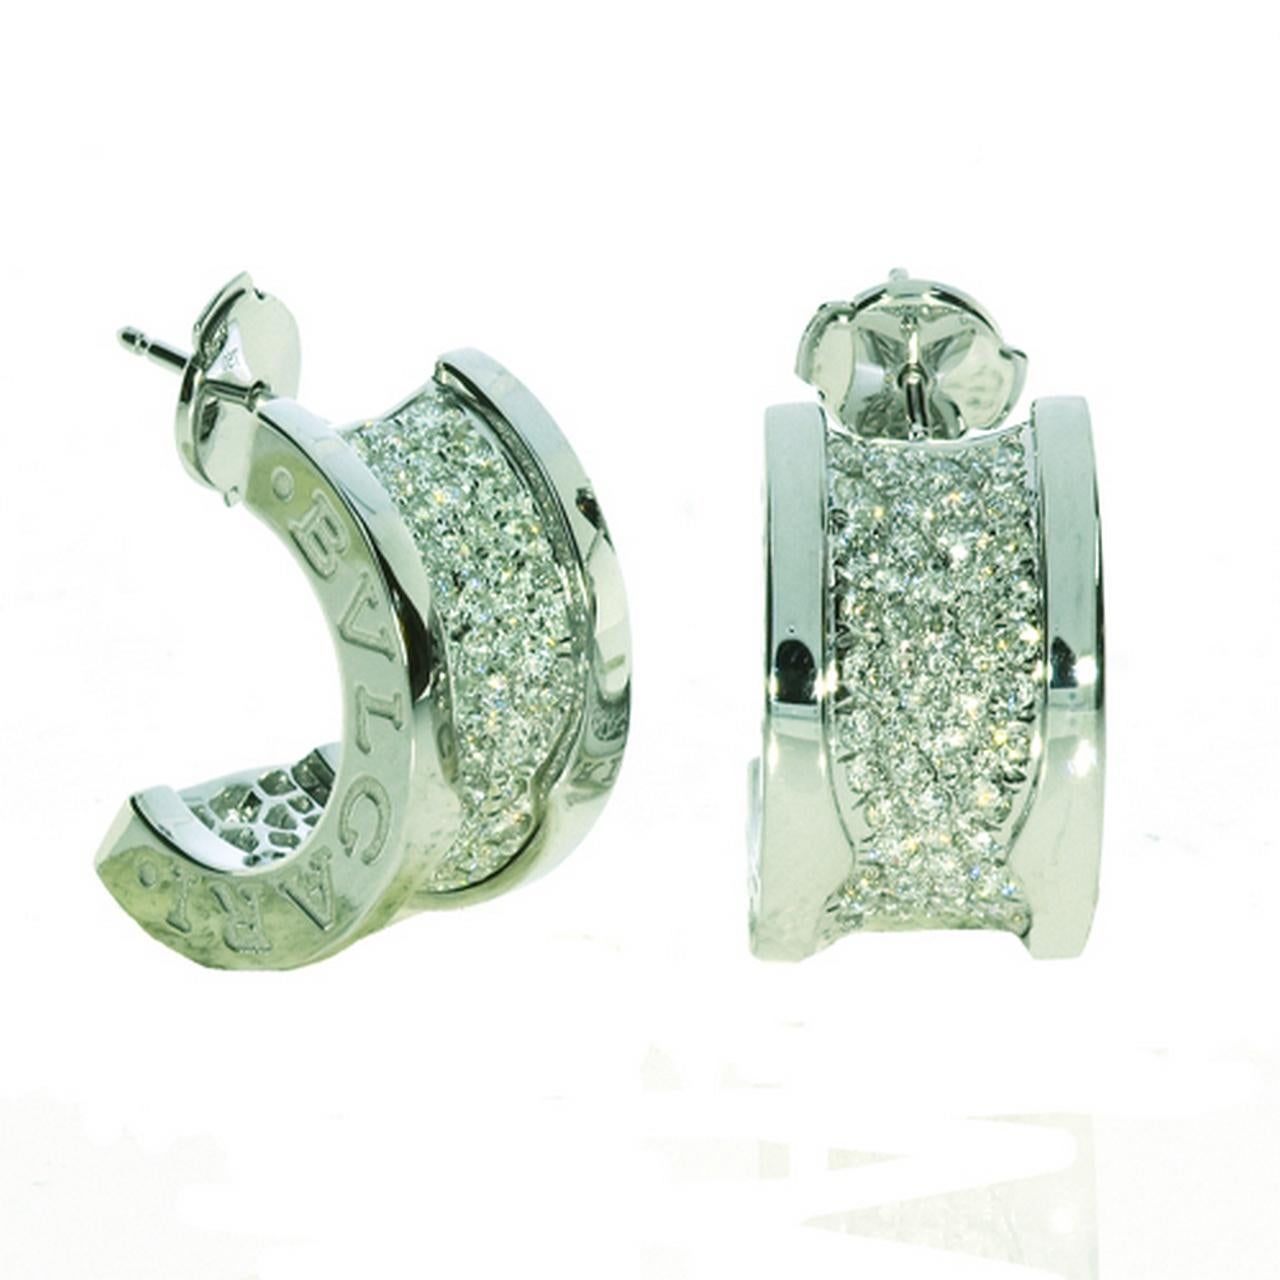 The Following Items we are offering is a Rare Important Radiant 18KT White Gold Estate Rare Magnificent Glittering Bvlgari Earrings. Earrings feature Rare Sparkling Fine Glittering Fancy White Diamonds set in 18KT Gold each with a Fancy Round Shaped